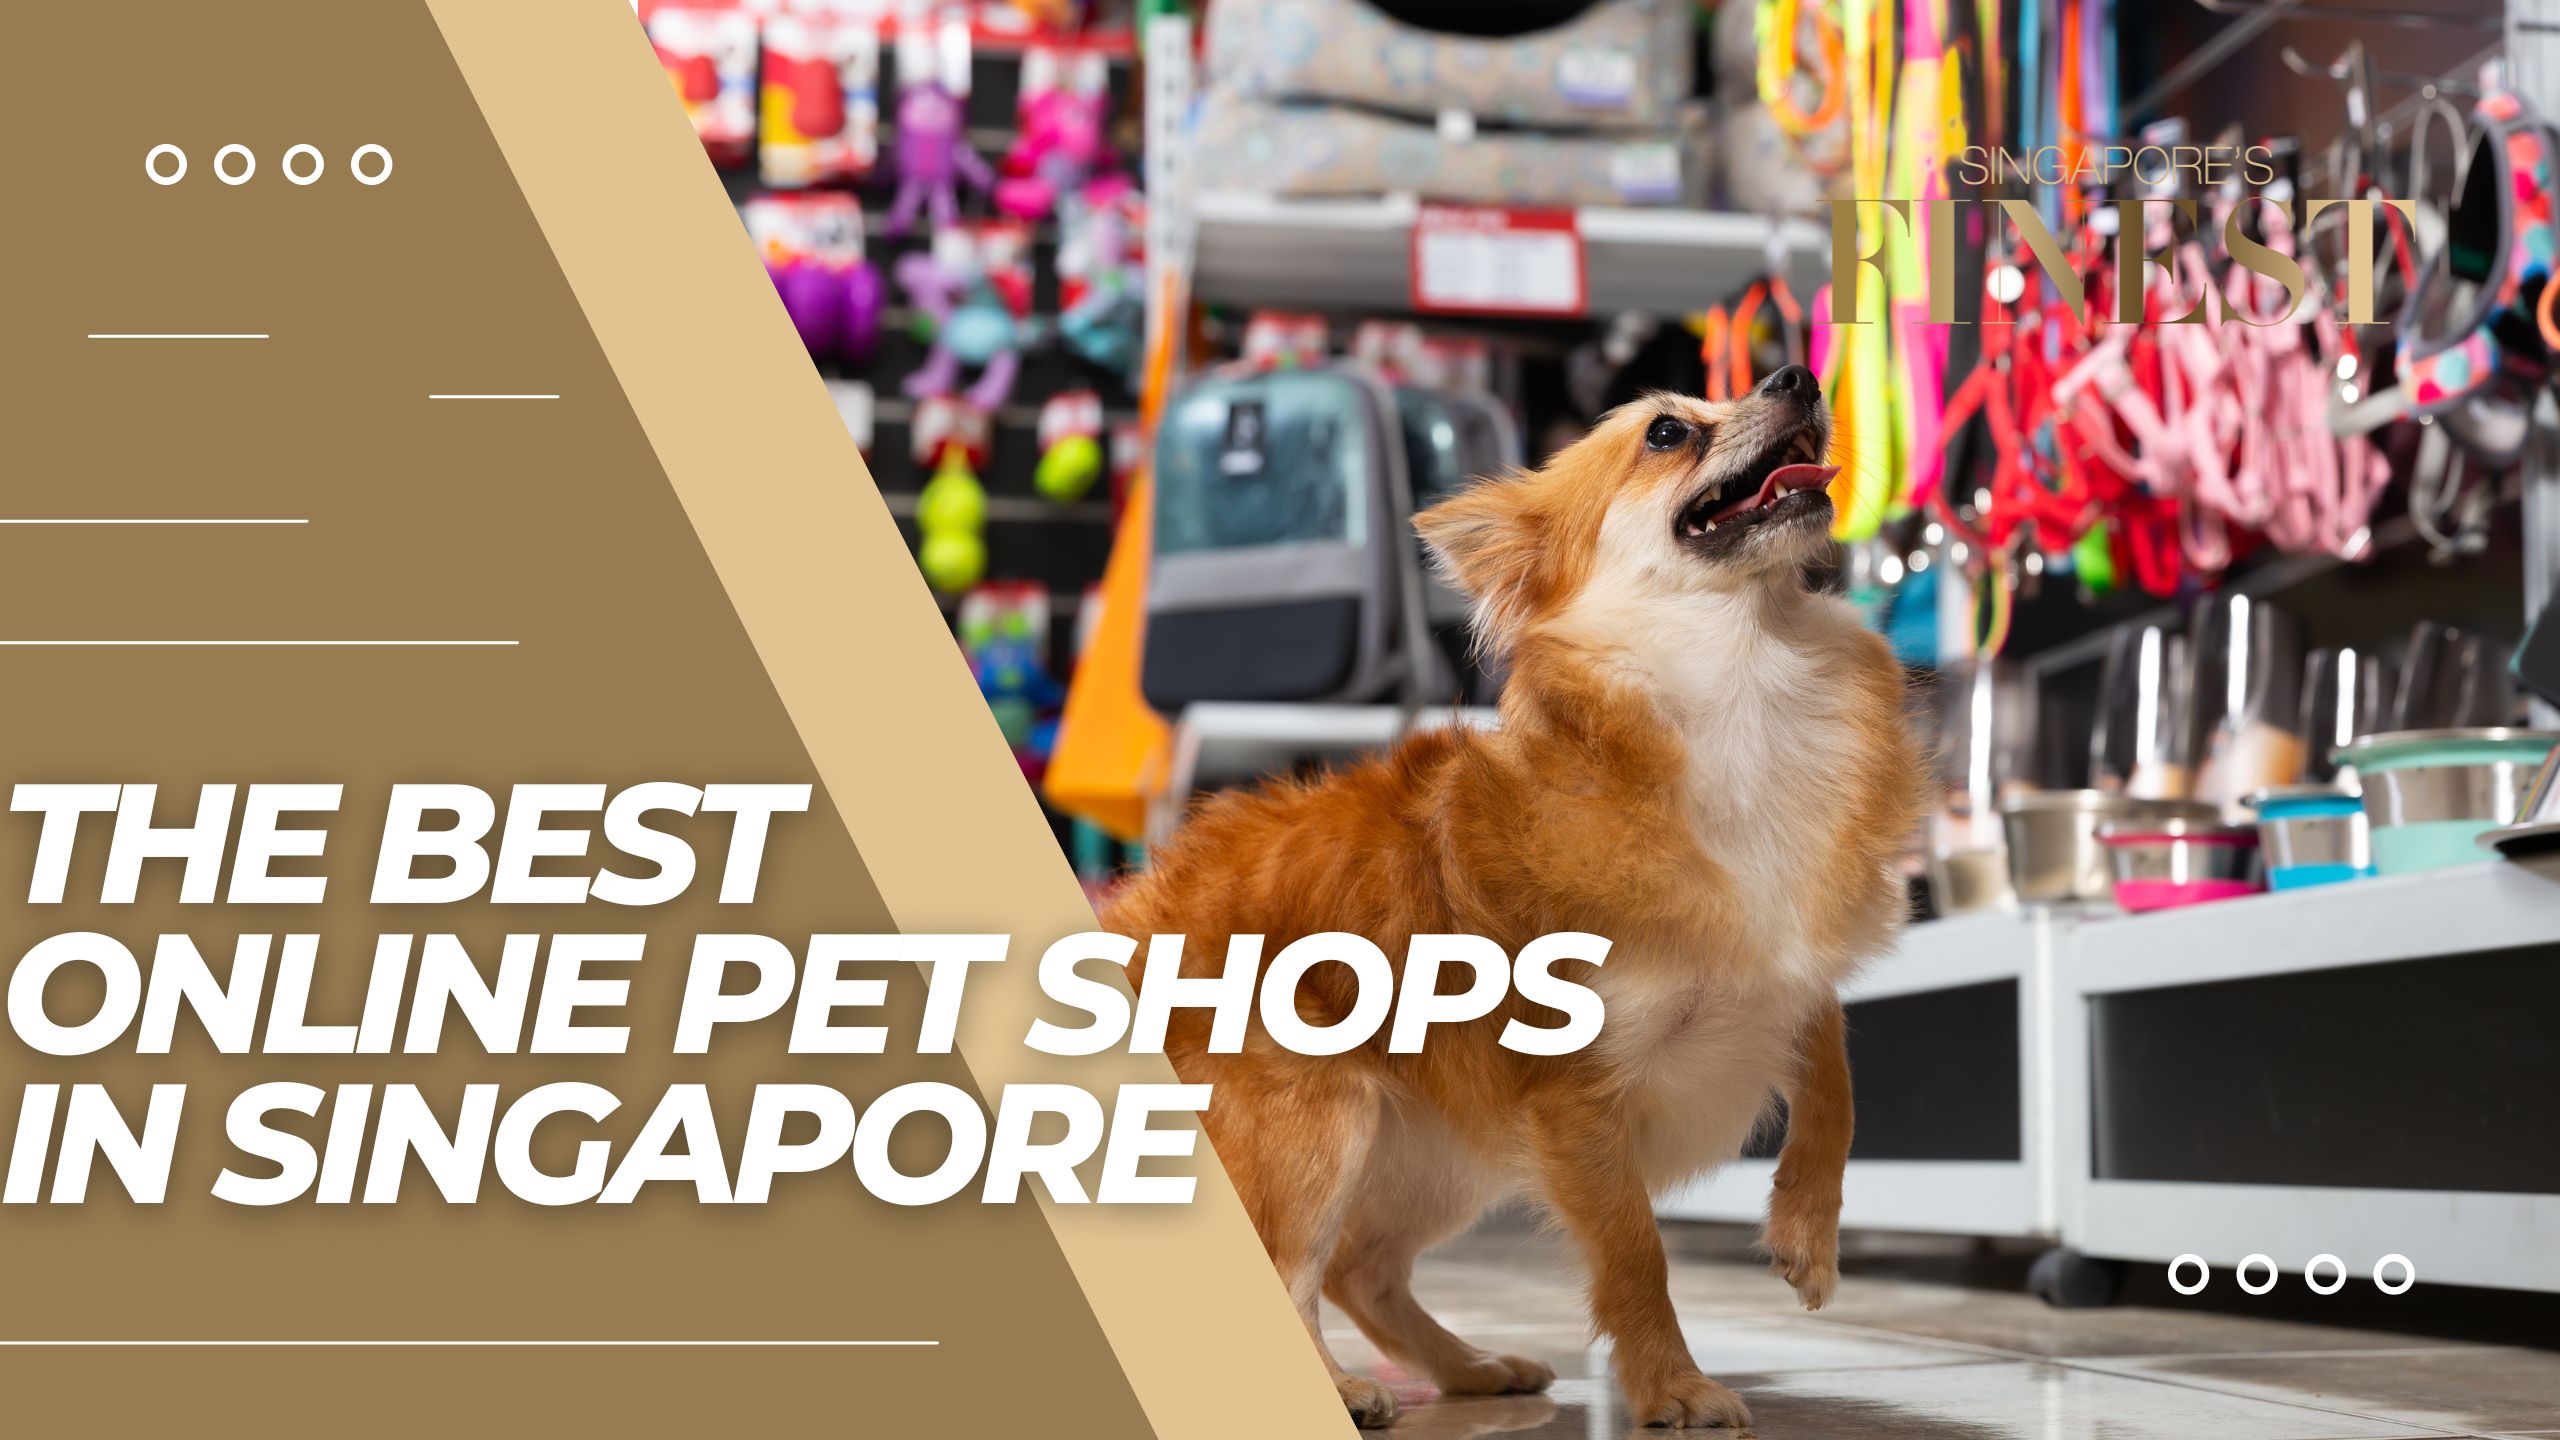 The Finest Online Pet Shops in Singapore